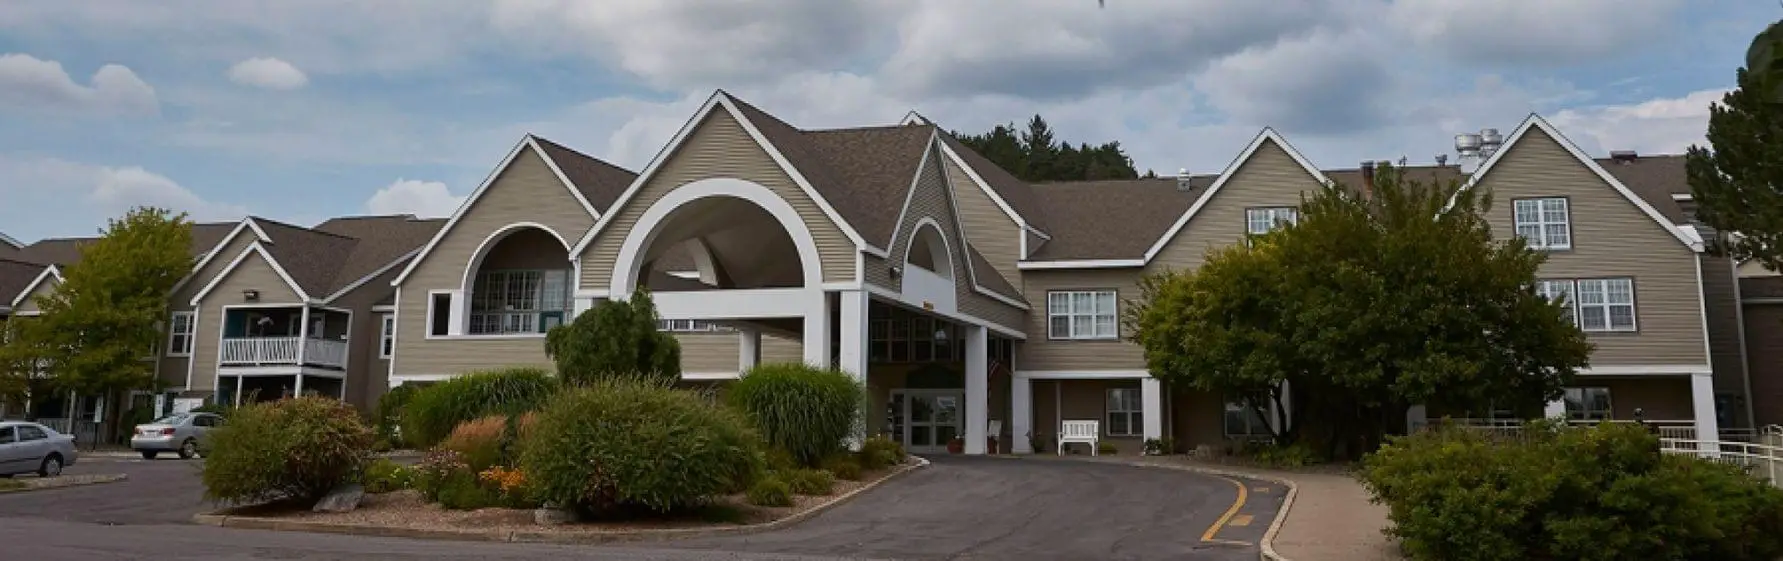 Photo of The Nottingham, Assisted Living, Nursing Home, Independent Living, CCRC, Syracuse, NY 13